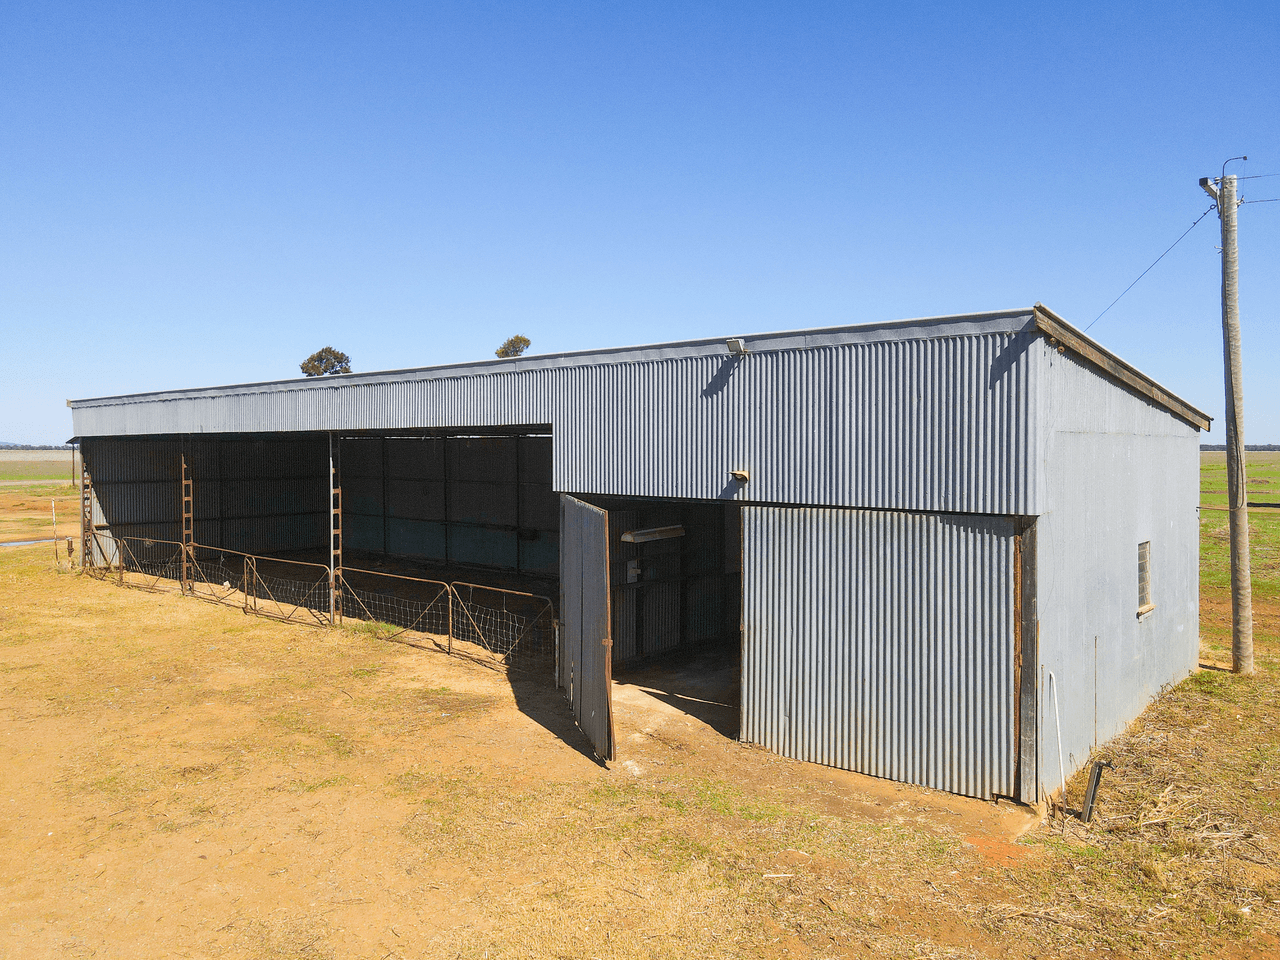 'Delvin' 5031 Henry Lawson Way, FORBES, NSW 2871